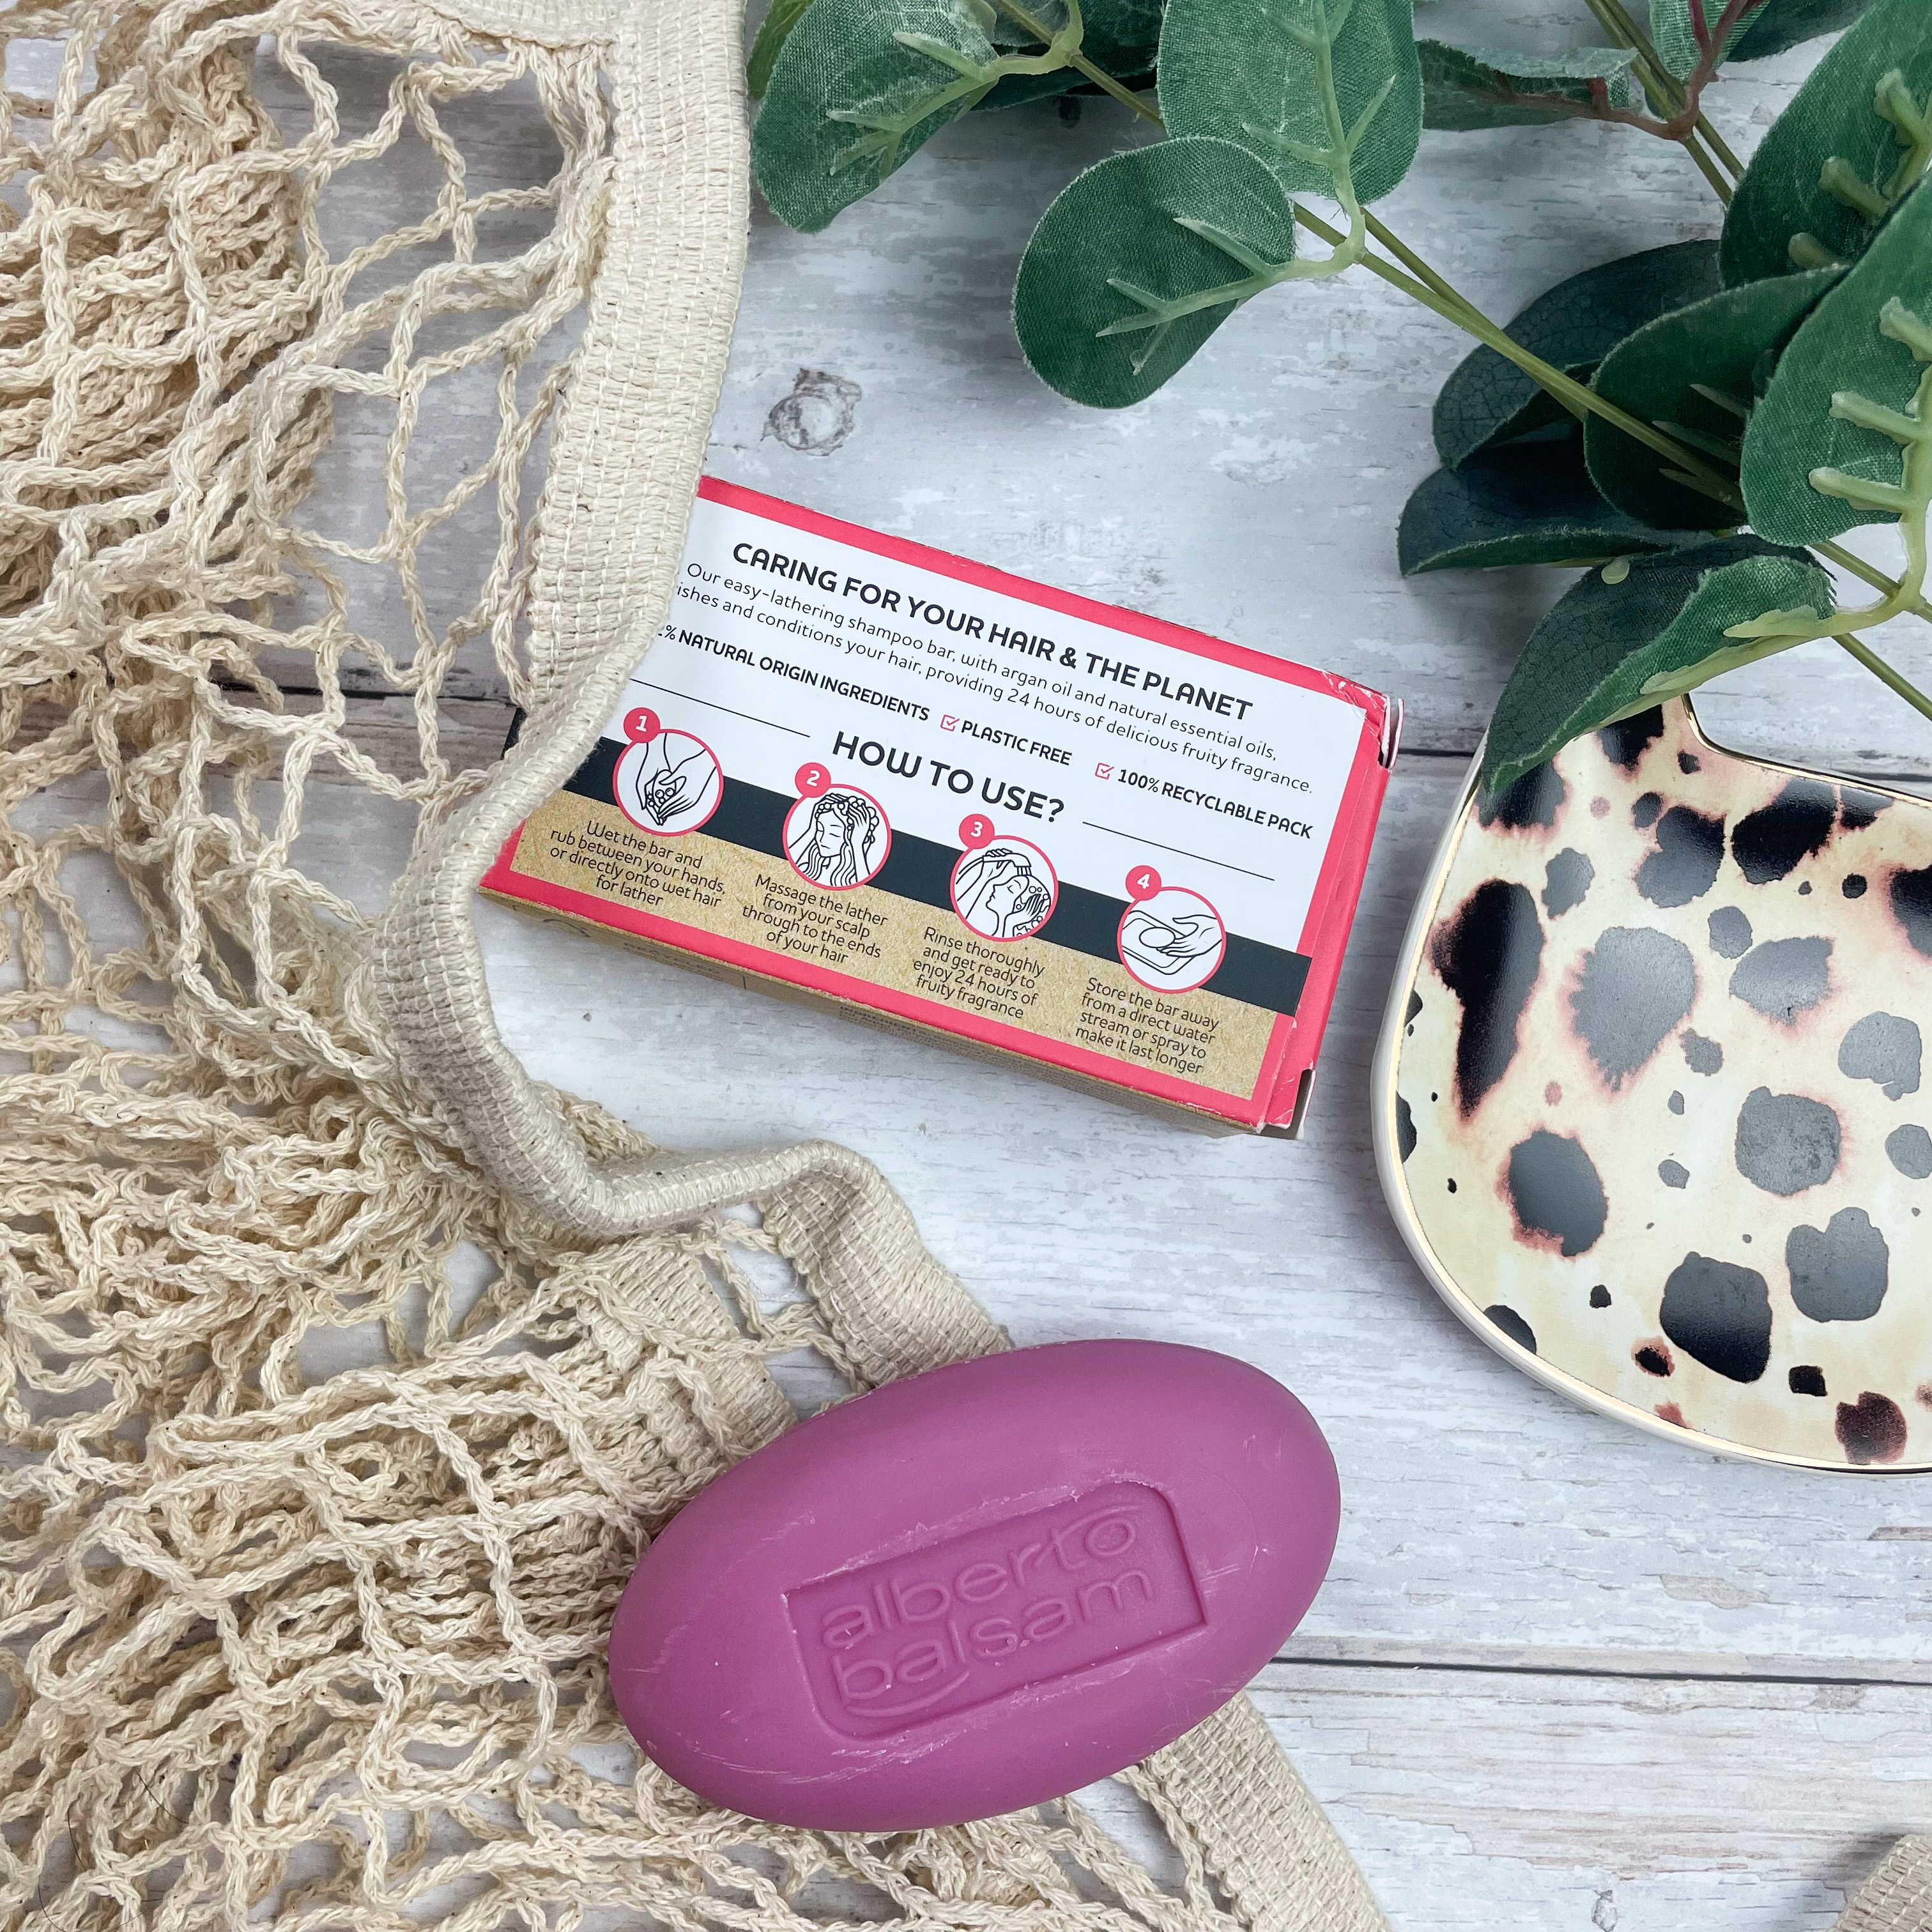 An Plastic Free Shampoo Bar Range From Balsam | Review | As Told By Kirsty